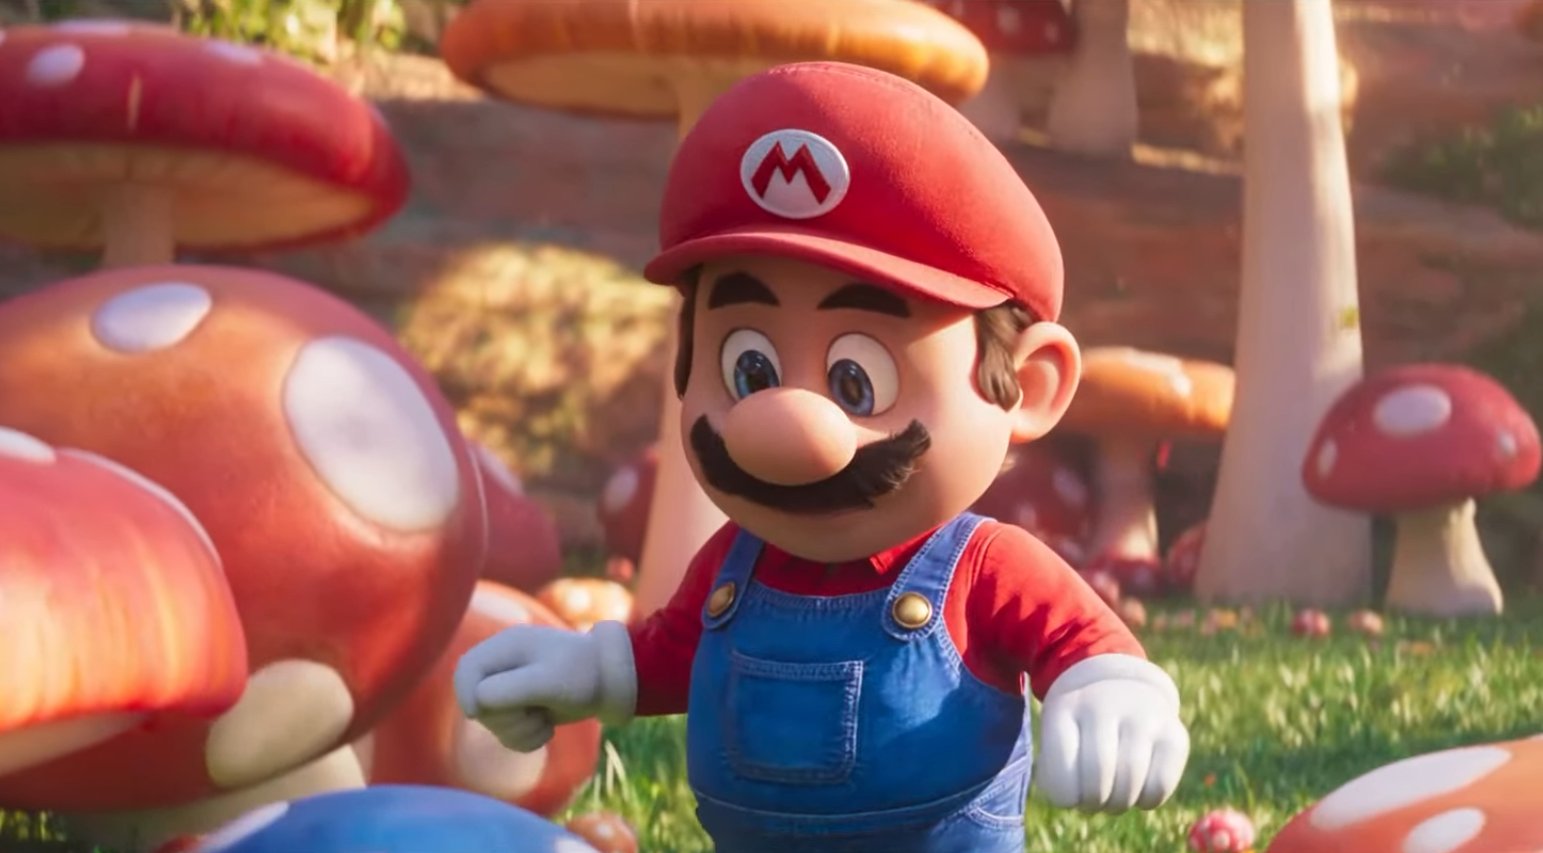 A Teaser Is Finally Released For The Super Mario Bros. Movie